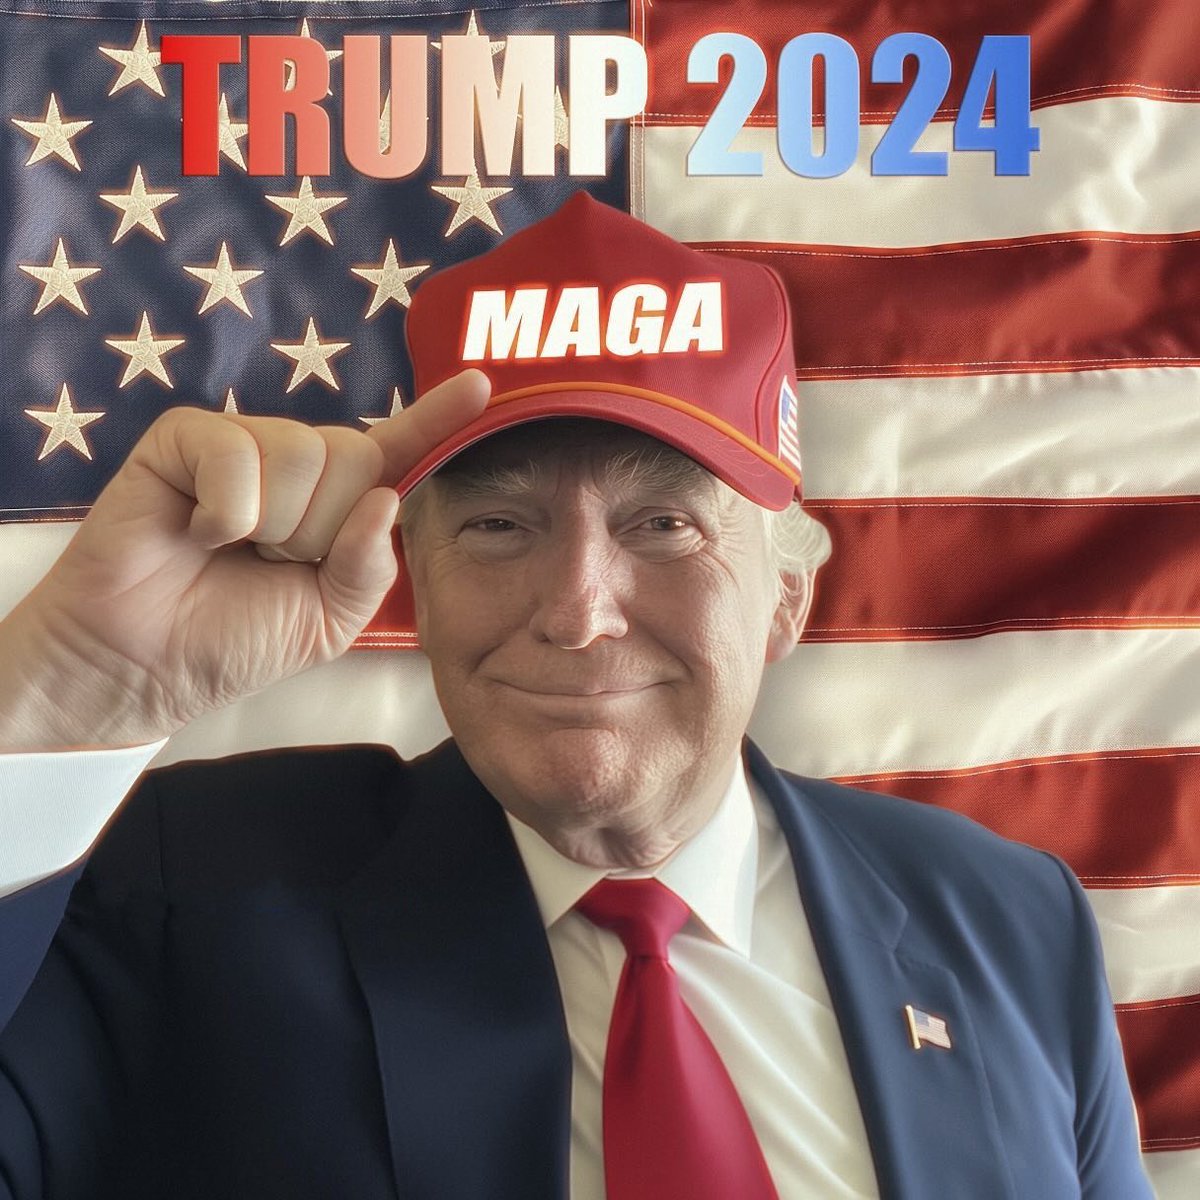 Do you believe Donald Trump will Make America Great Again? 🇺🇸 A) Yes, absolutely! 🌟 B) No way! 🙅‍♂️ C) I'm not sure yet... 🤔 D) Let's see what happens! 🇺🦅